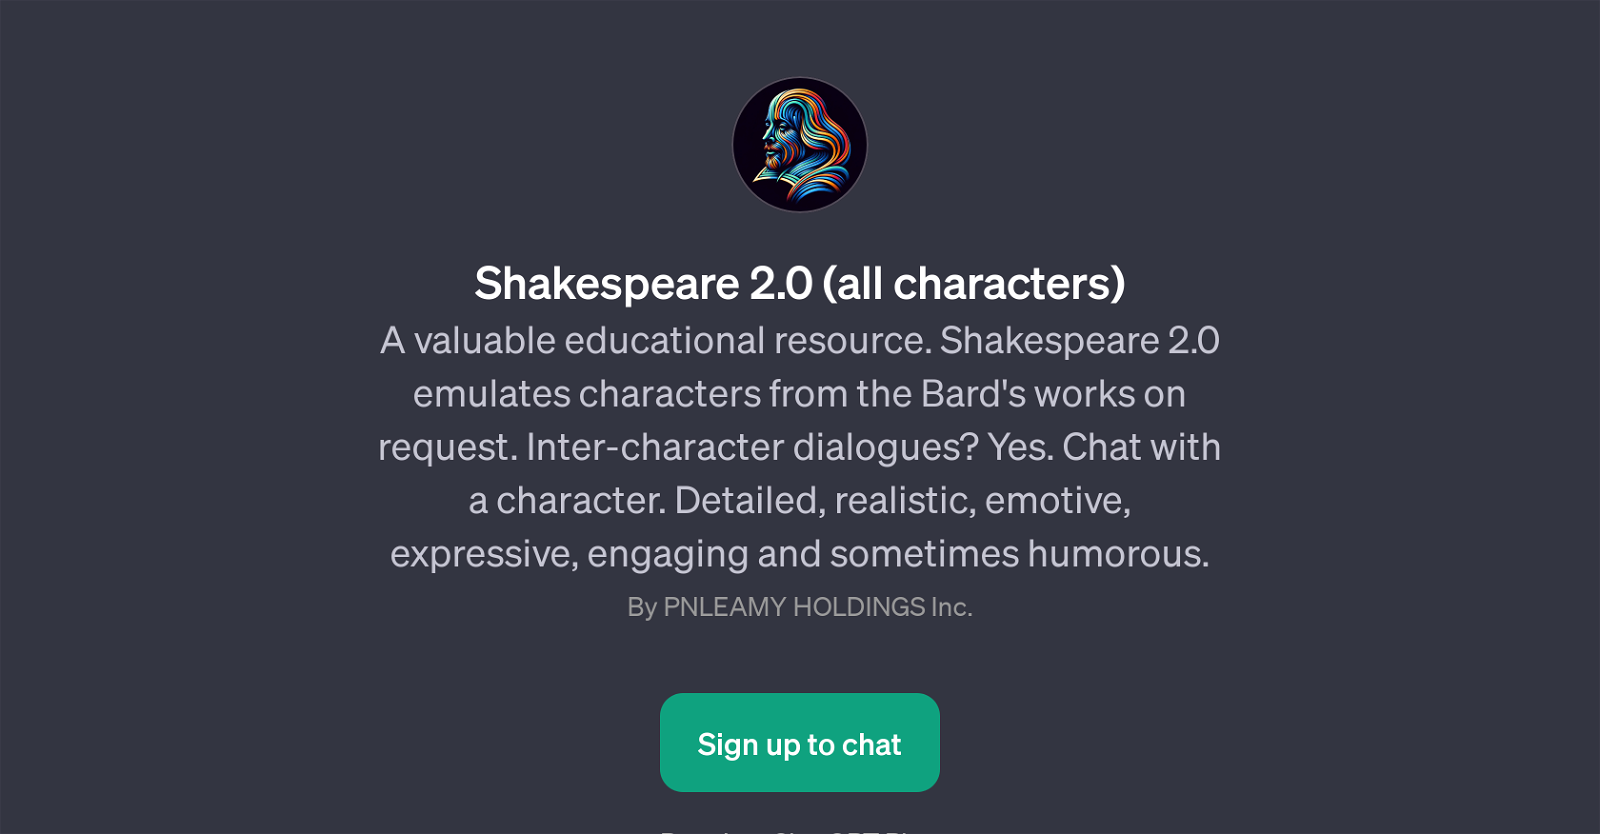 Shakespeare 2.0 (all characters) website